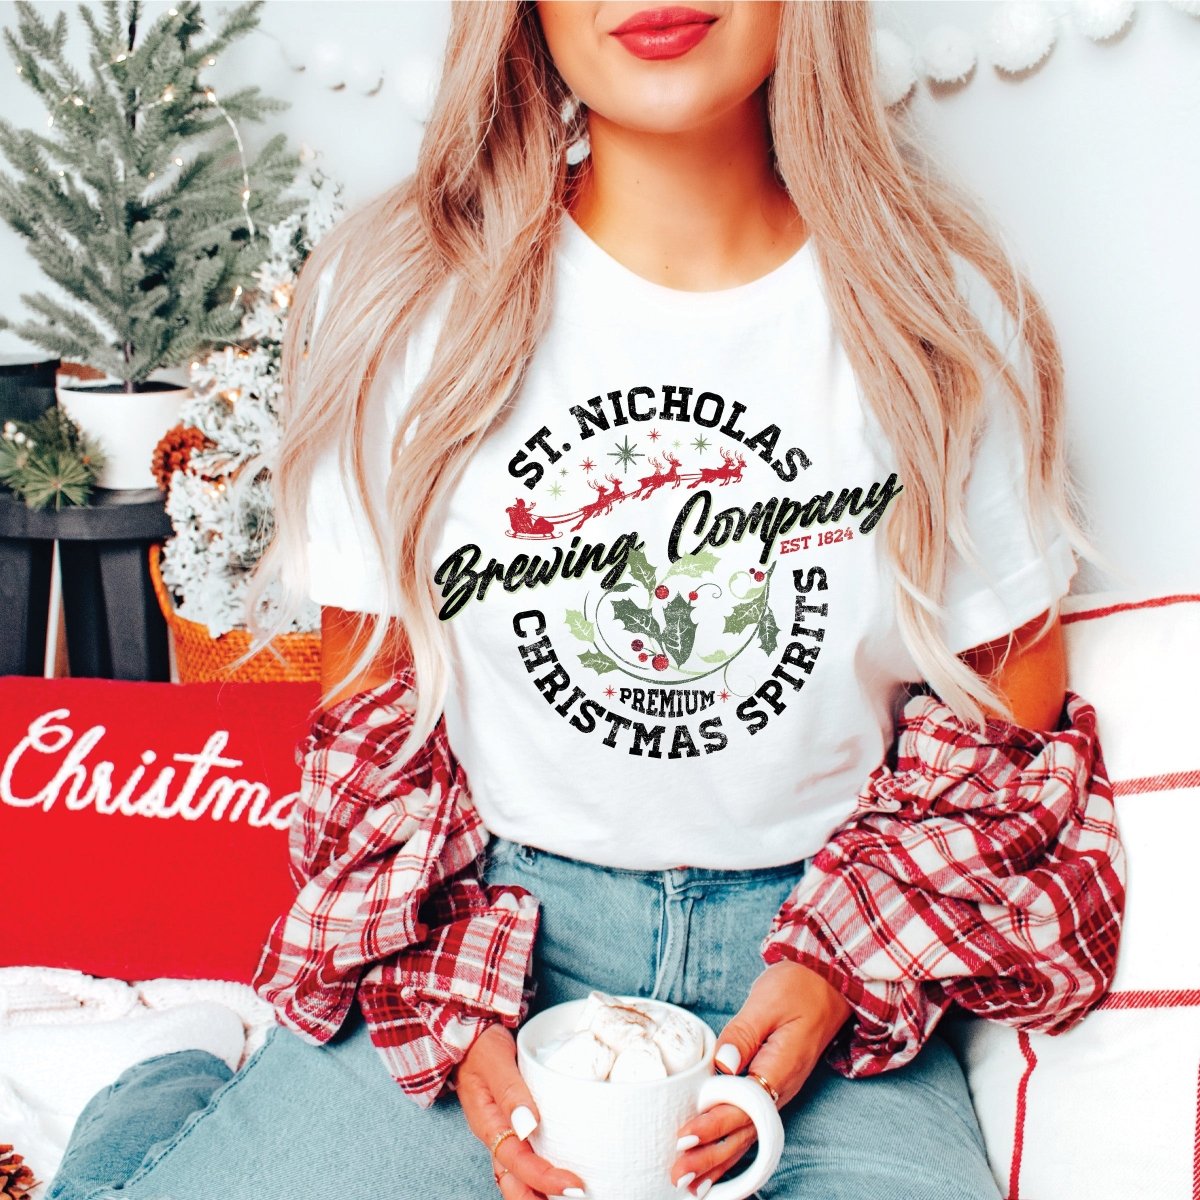 St. Nicholas Brewing Co - Bella Graphic Wholesale Tee - Limeberry Designs